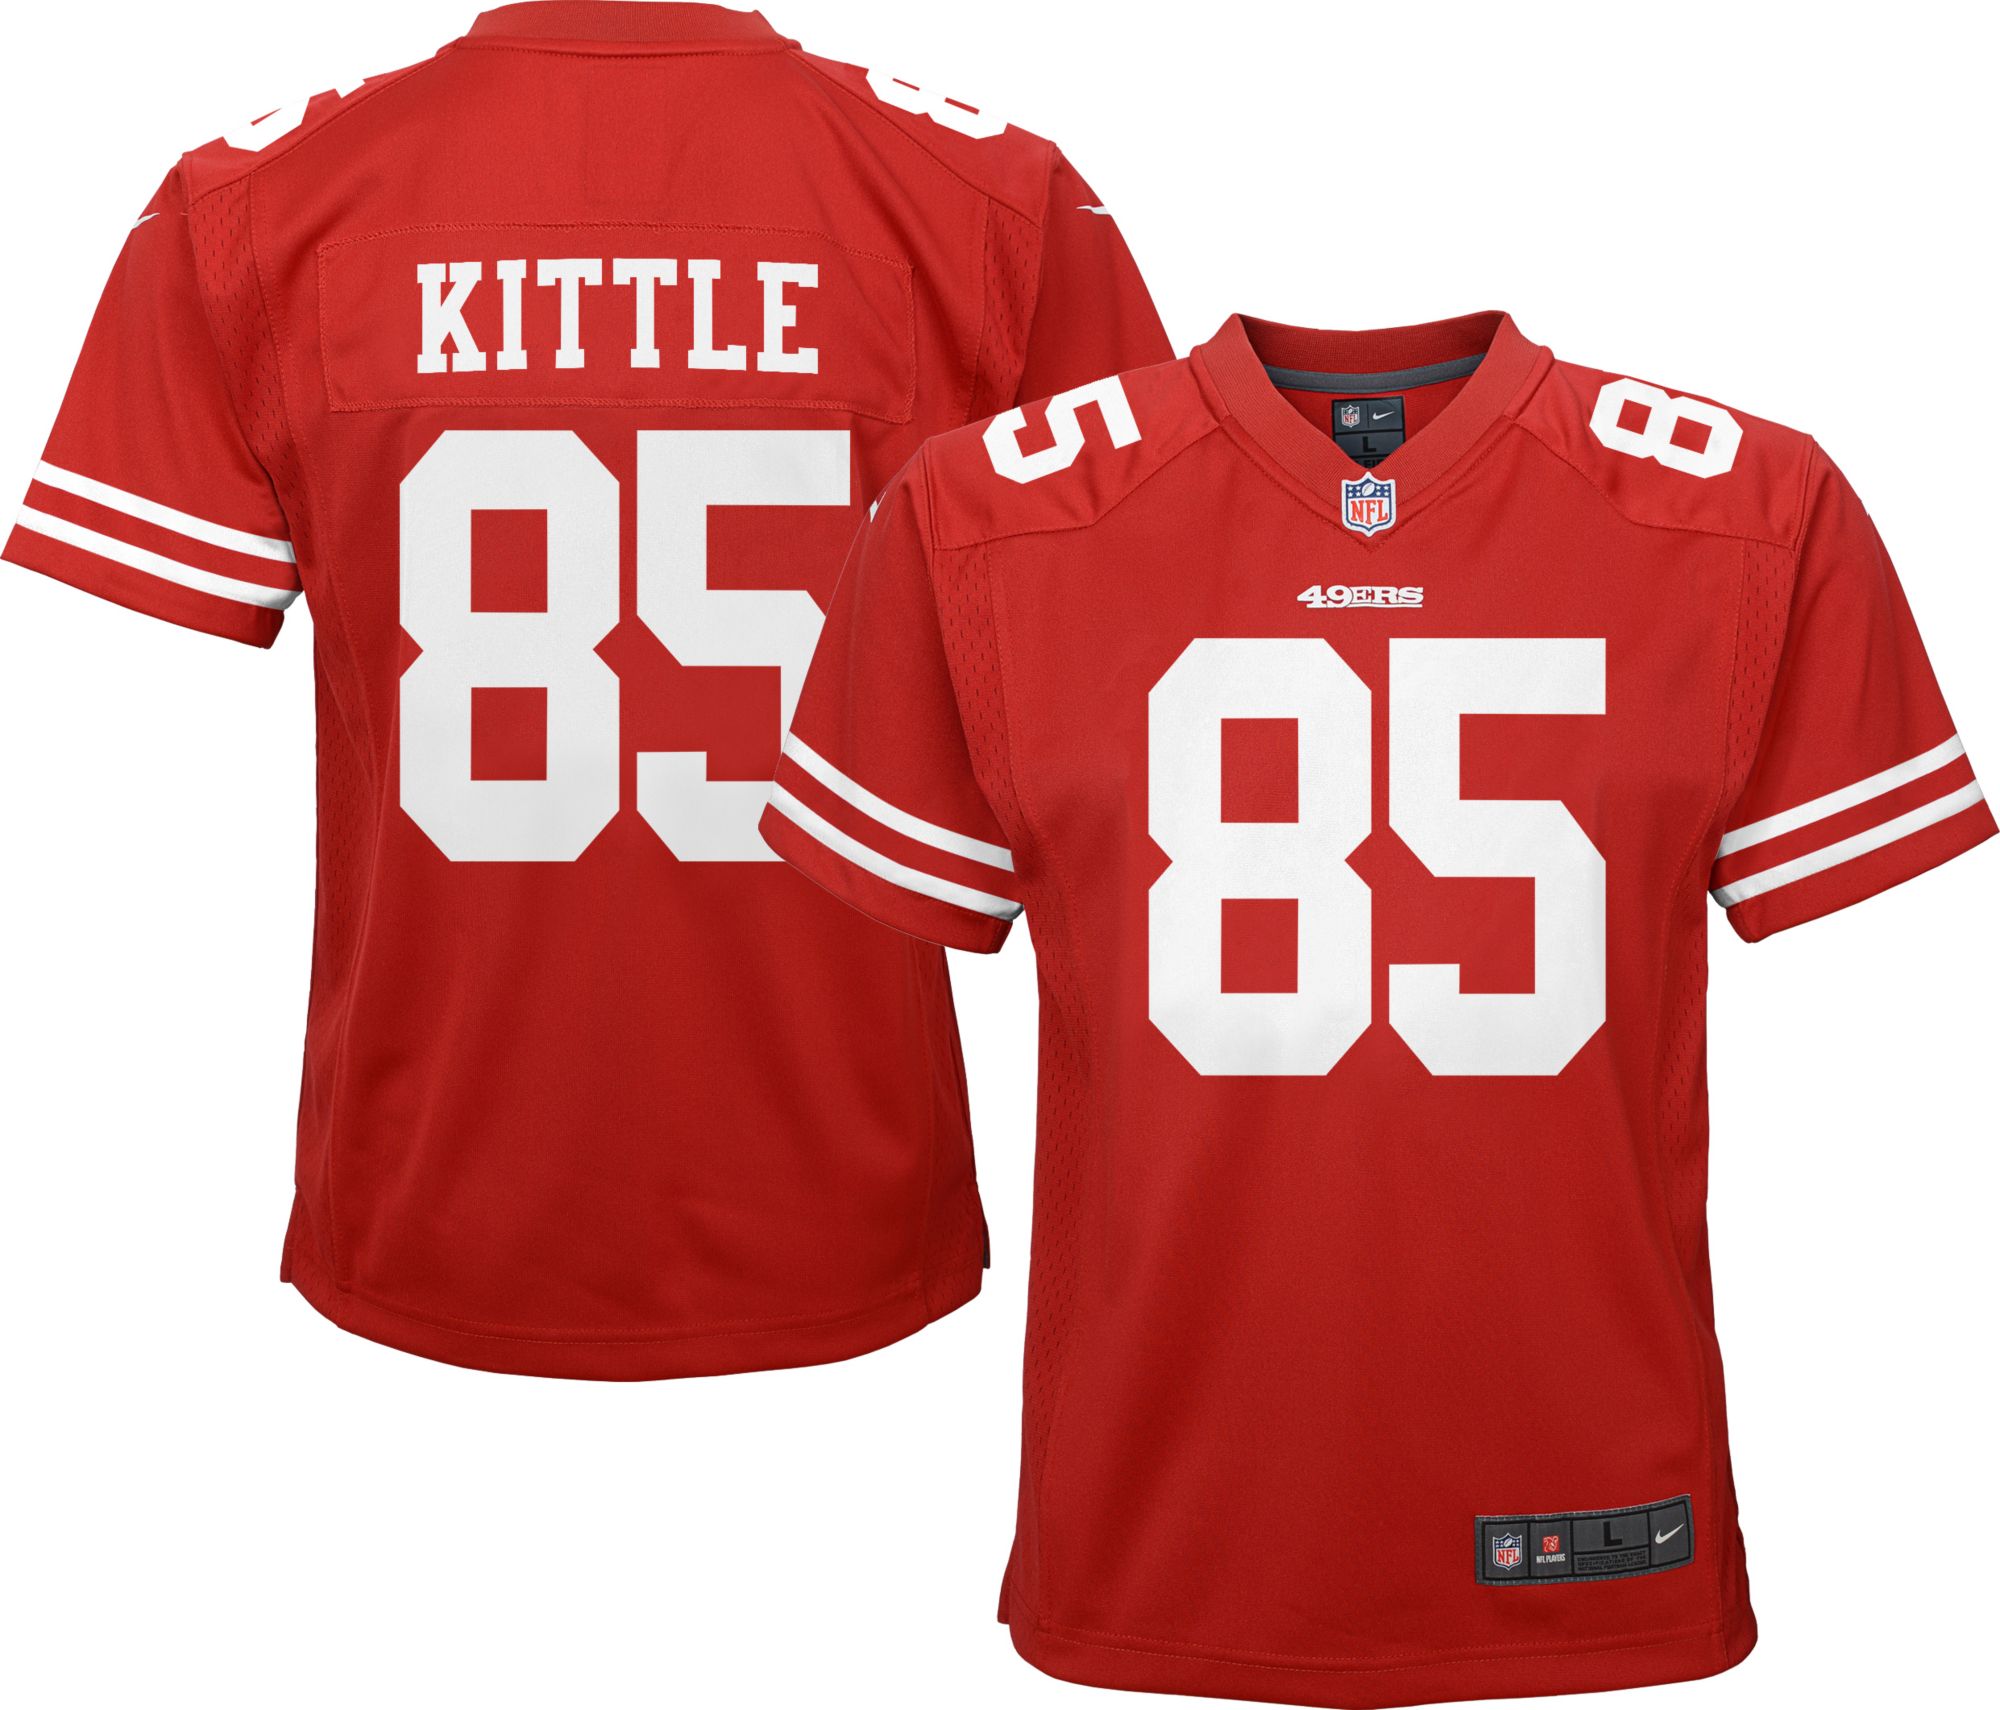 85 49ers jersey